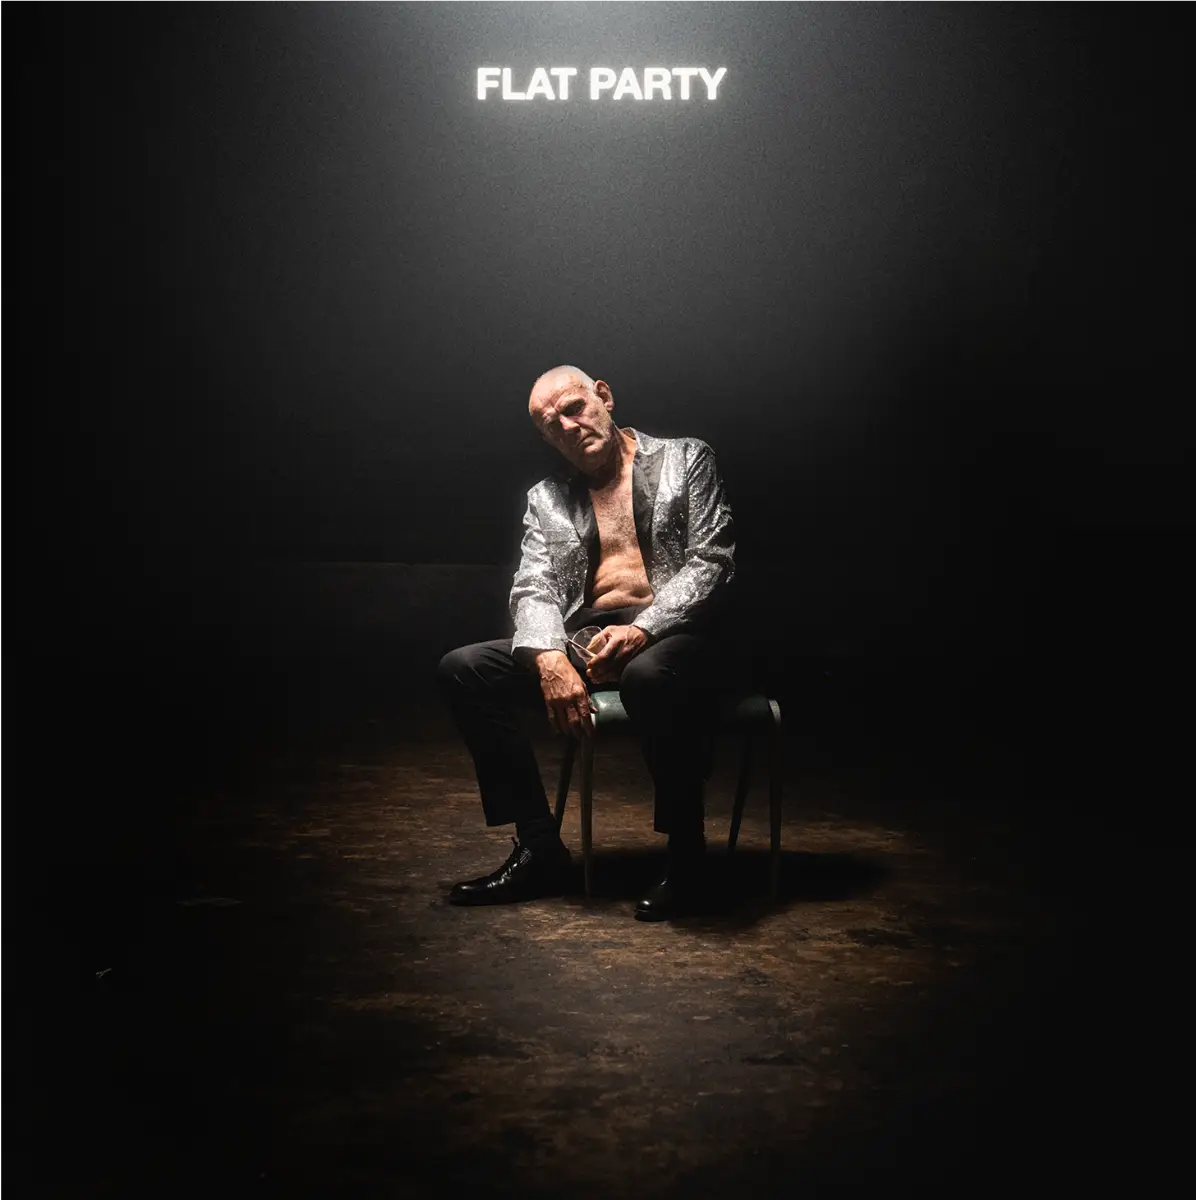 <strong>Flat Party - Flat Party</strong> (Vinyl 12 - white)